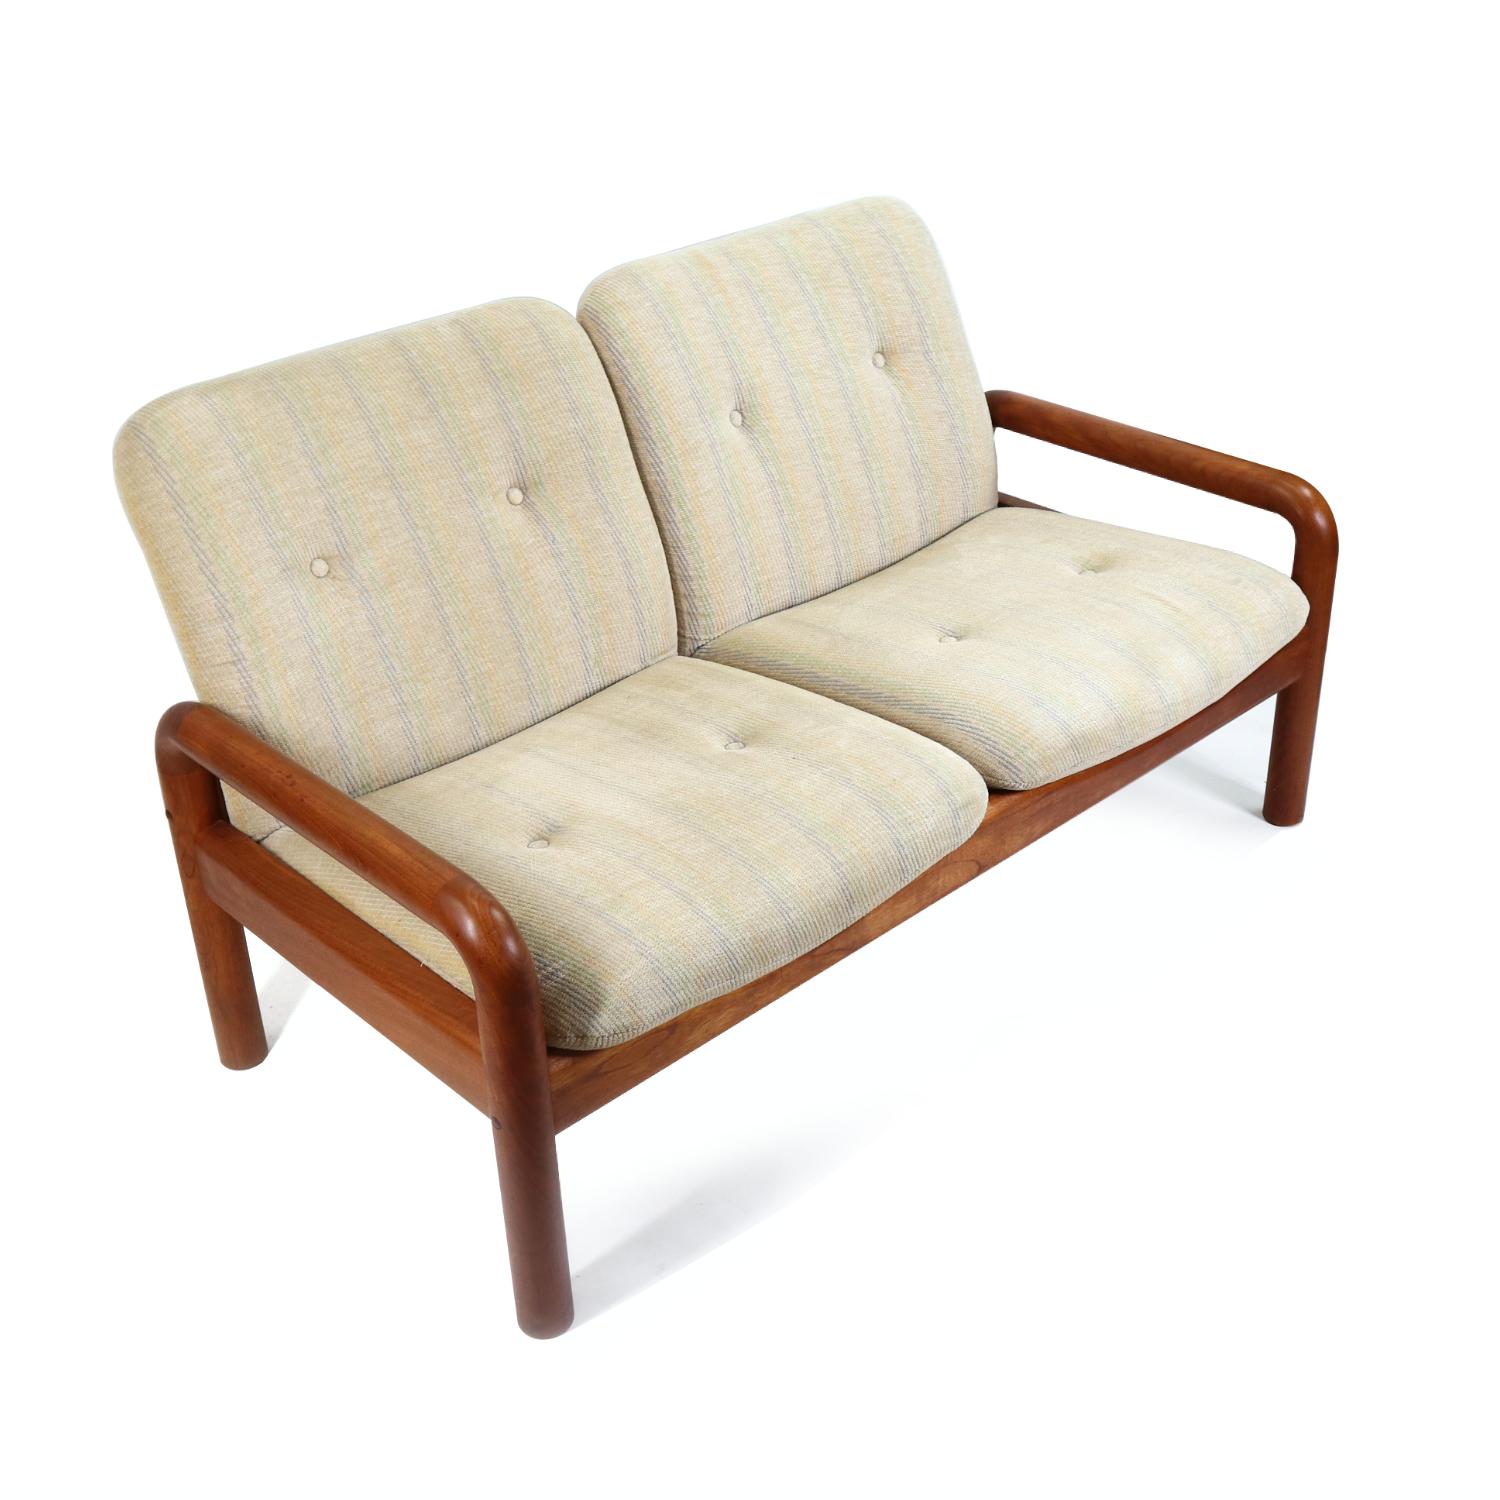 Vintage Danish modern loveseat size sofa by D-Scan. The solid teak wood frame supports the light beige upholstered cushions. Quality is in the details with the choice of durable, attractive teak wood and plush fabric. The light beige fabric has a